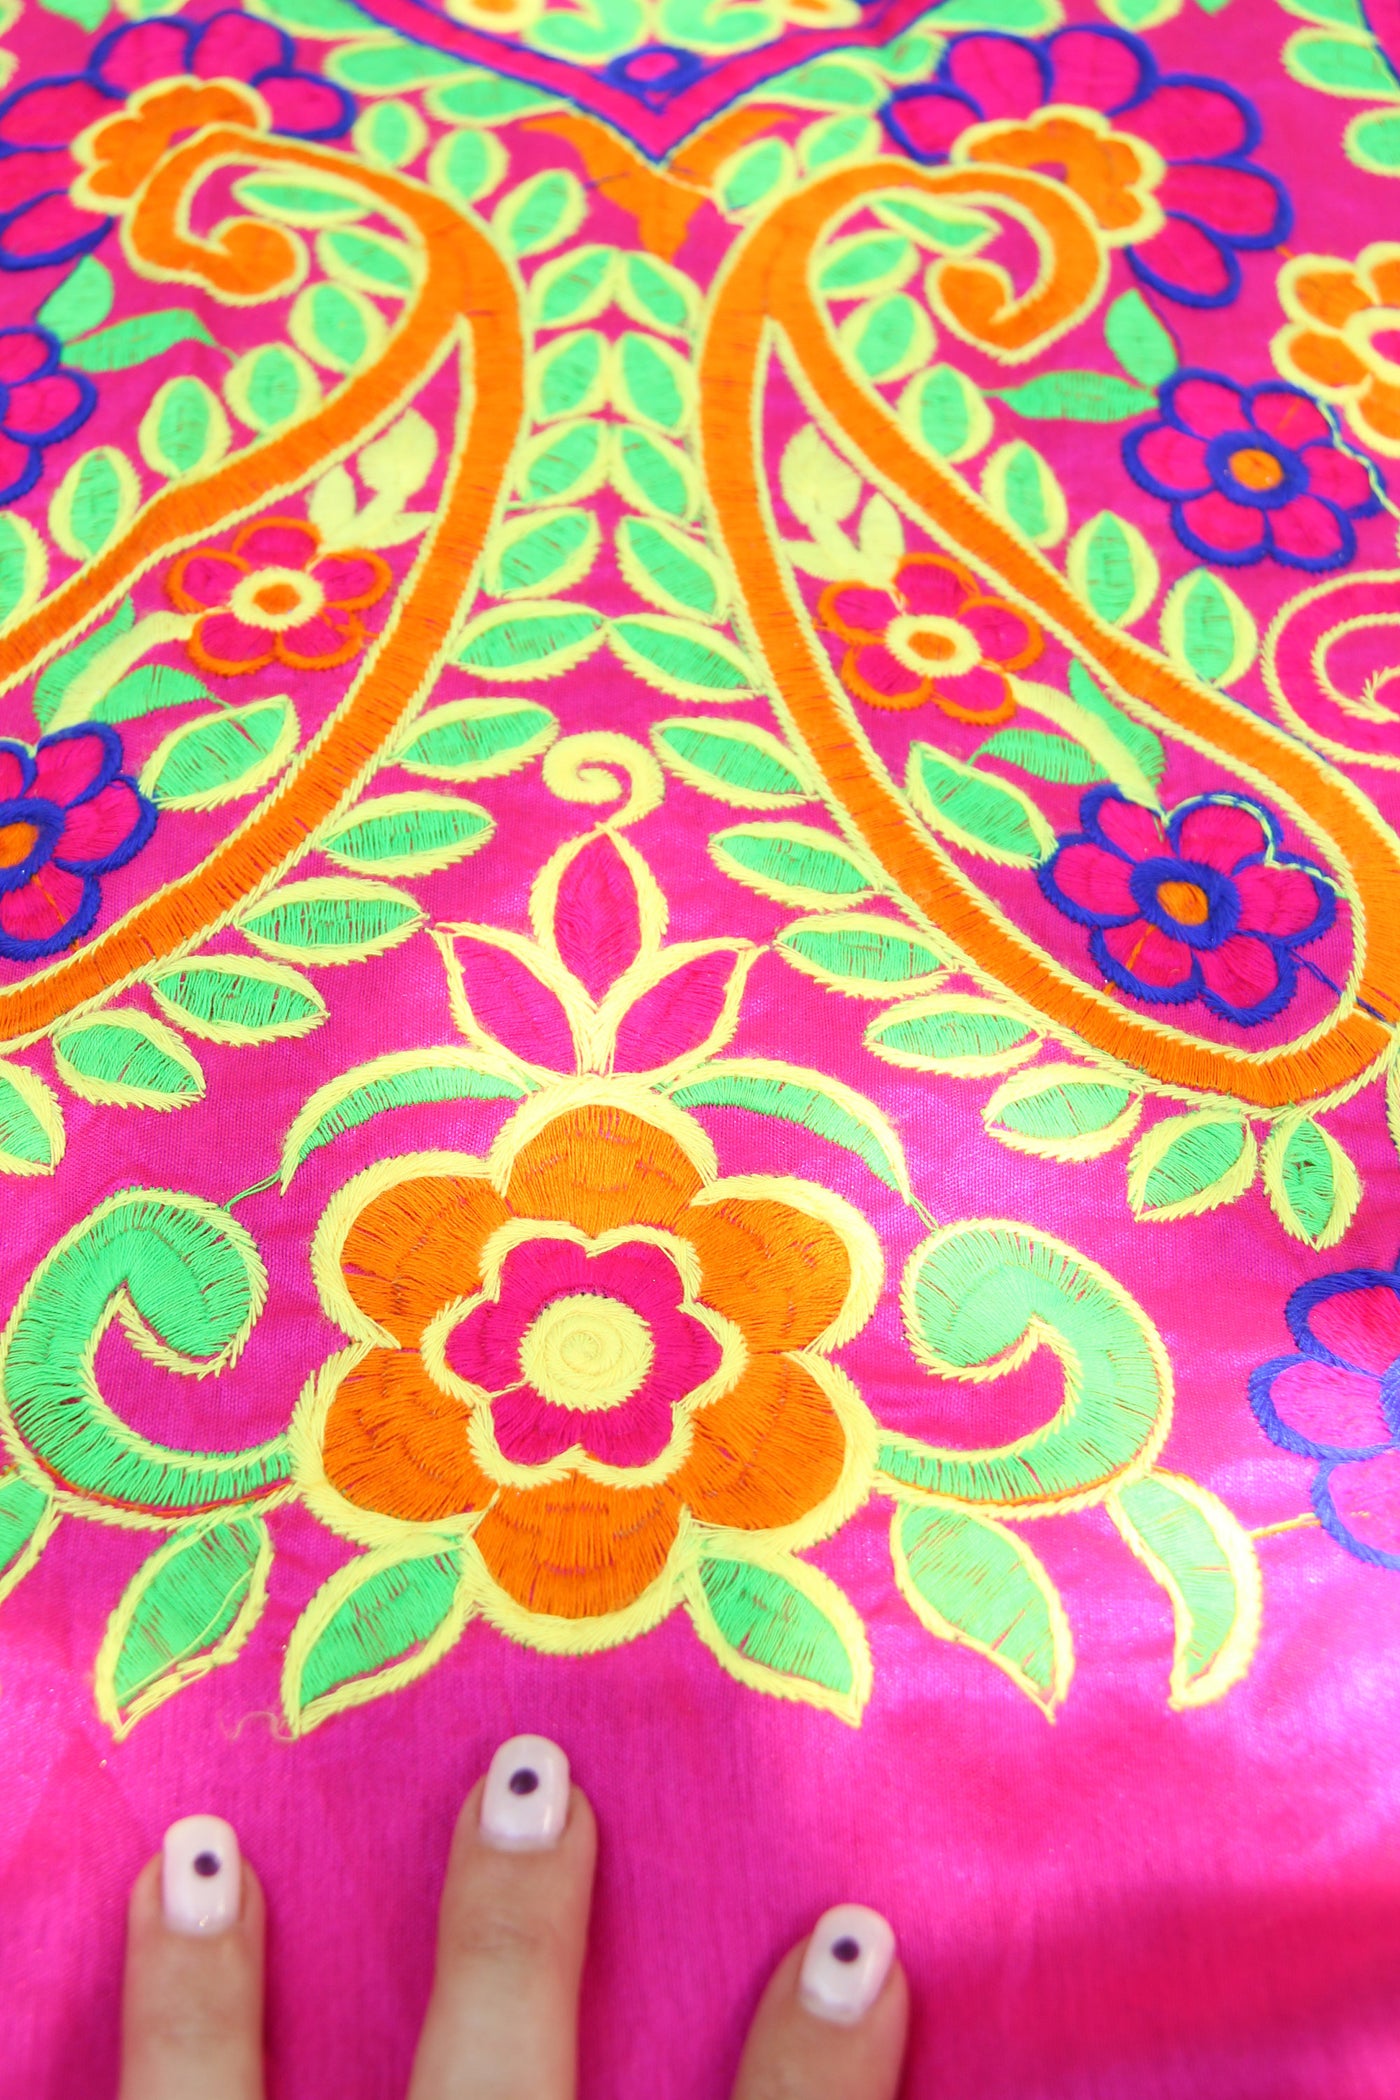 Embroidered Floral Fabric from India, Pink Silk Wall Hanging, 44"x1 yd